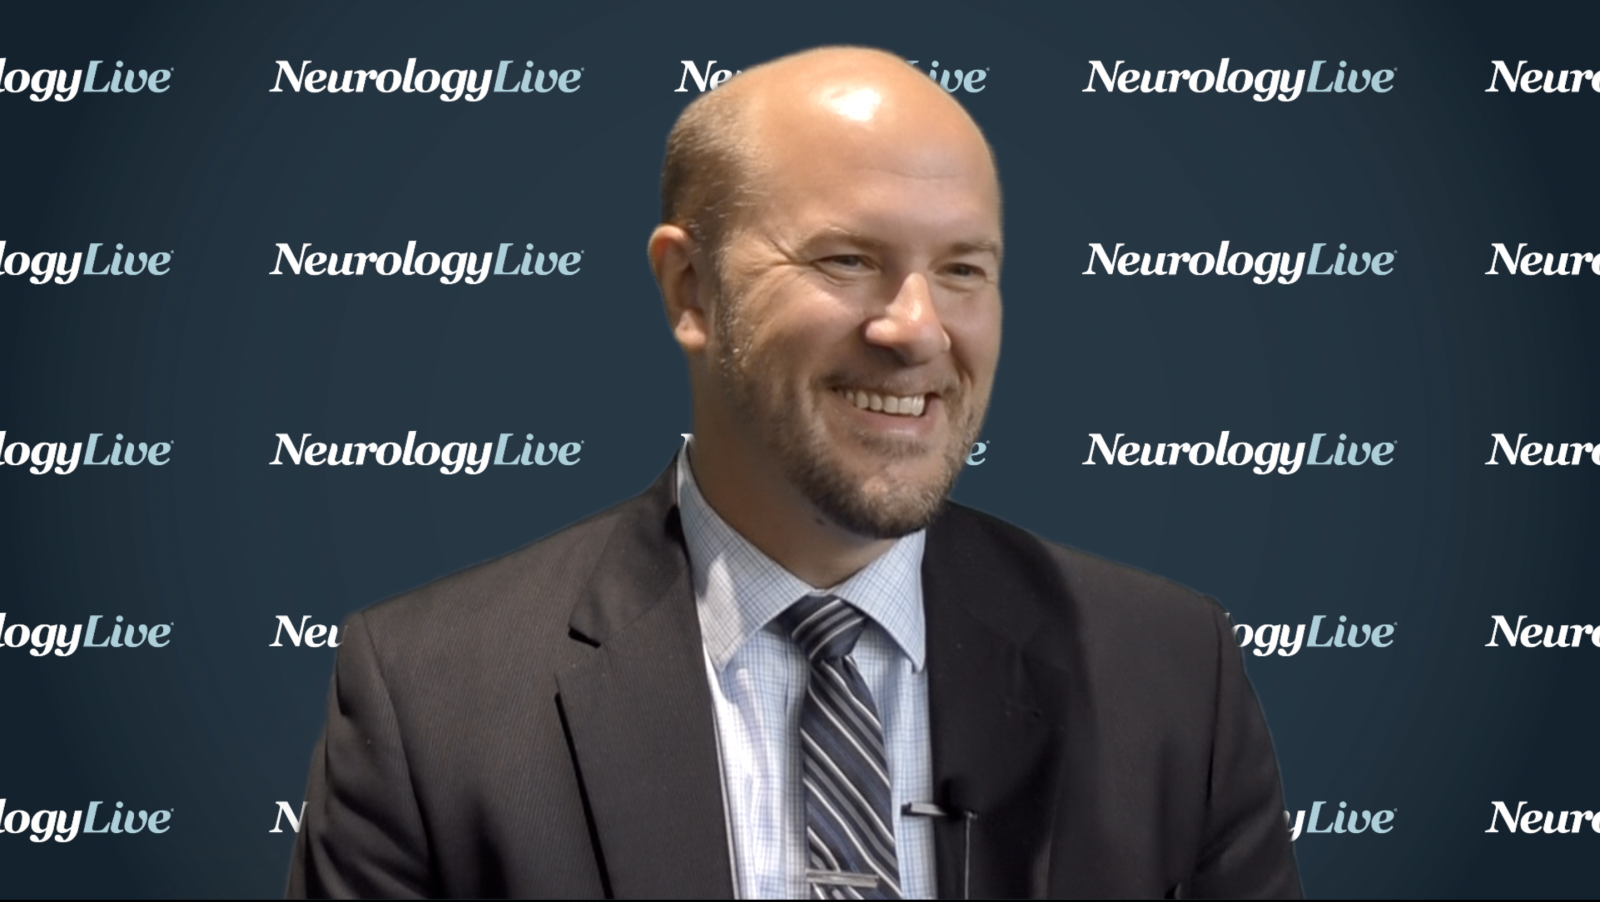 Benjamin Walter, MD: Using Focused Ultrasound to Open the Blood-Brain Barrier